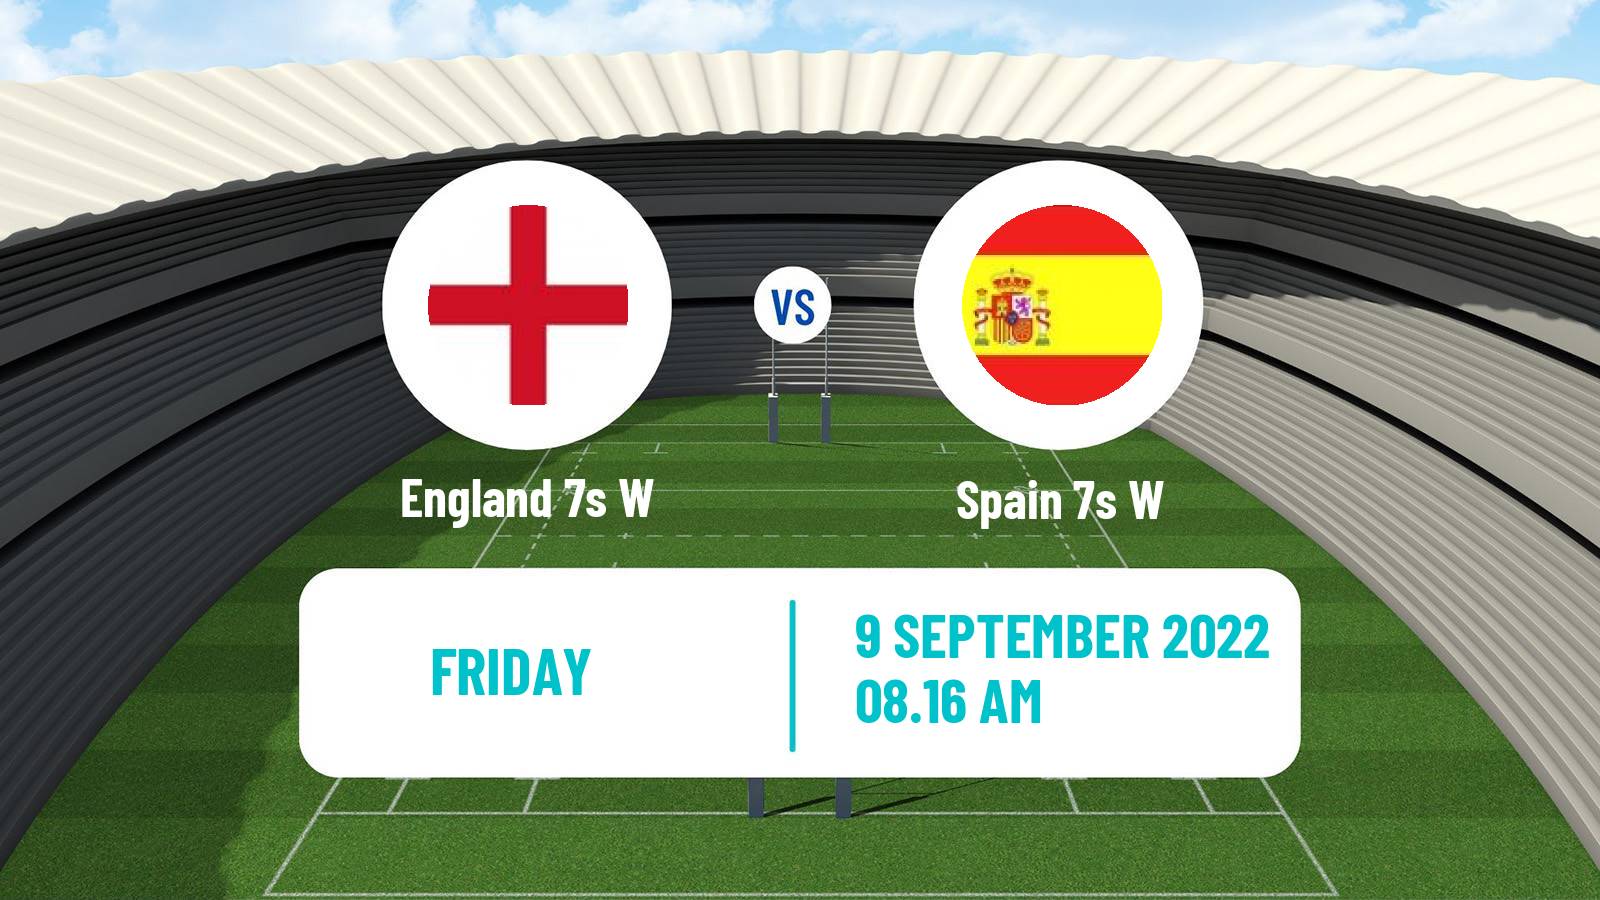 Rugby union Sevens World Cup Women England 7s W - Spain 7s W